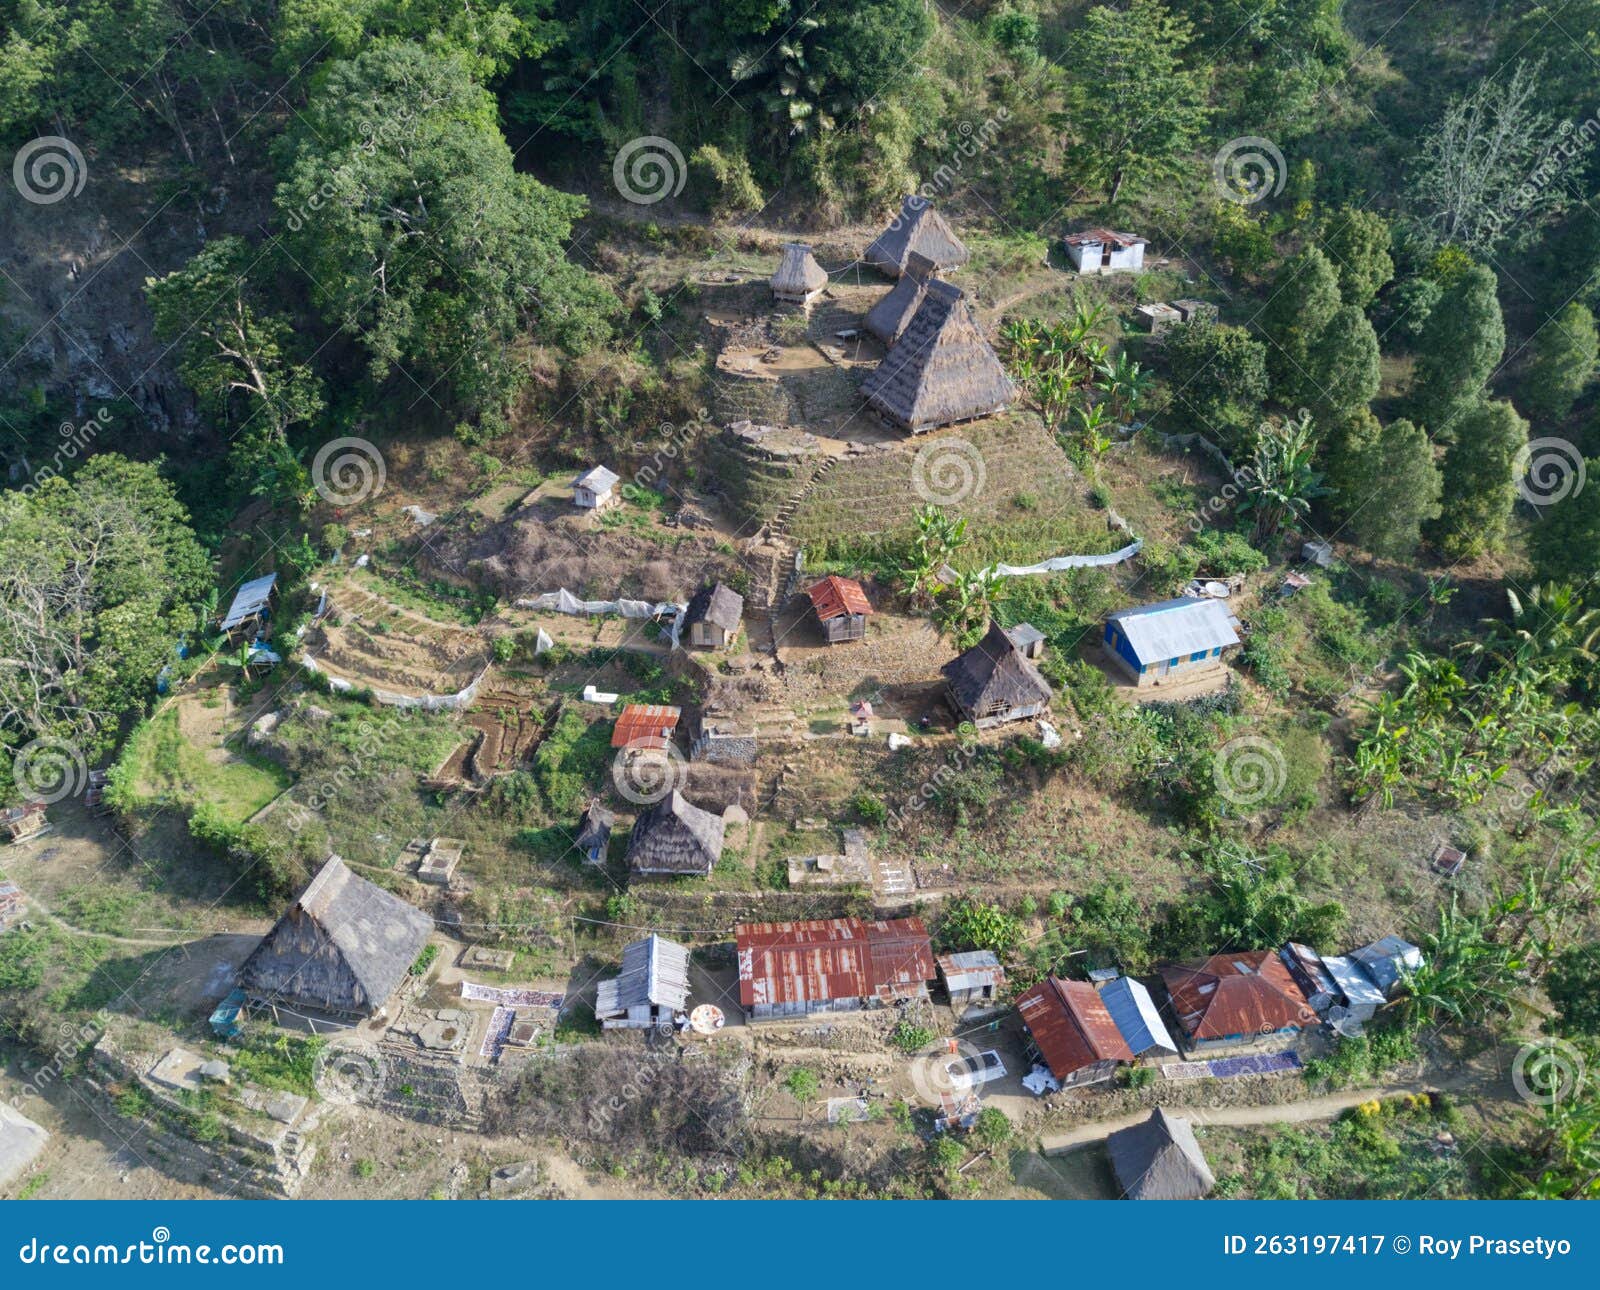 drone view traditional houses in the wologai village in ende east nusa tenggara